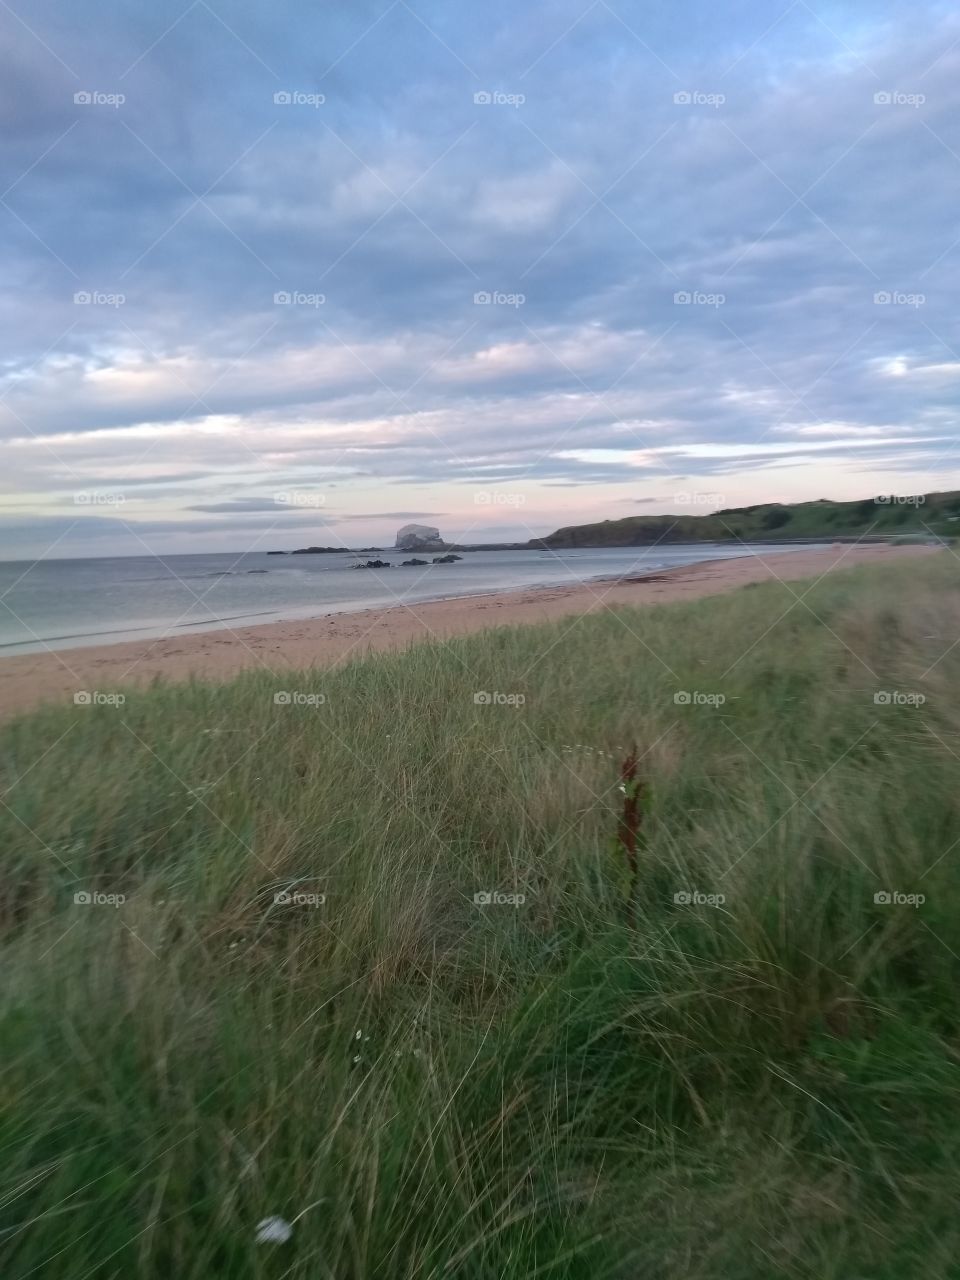 One of my best photo's camping at North Berwick